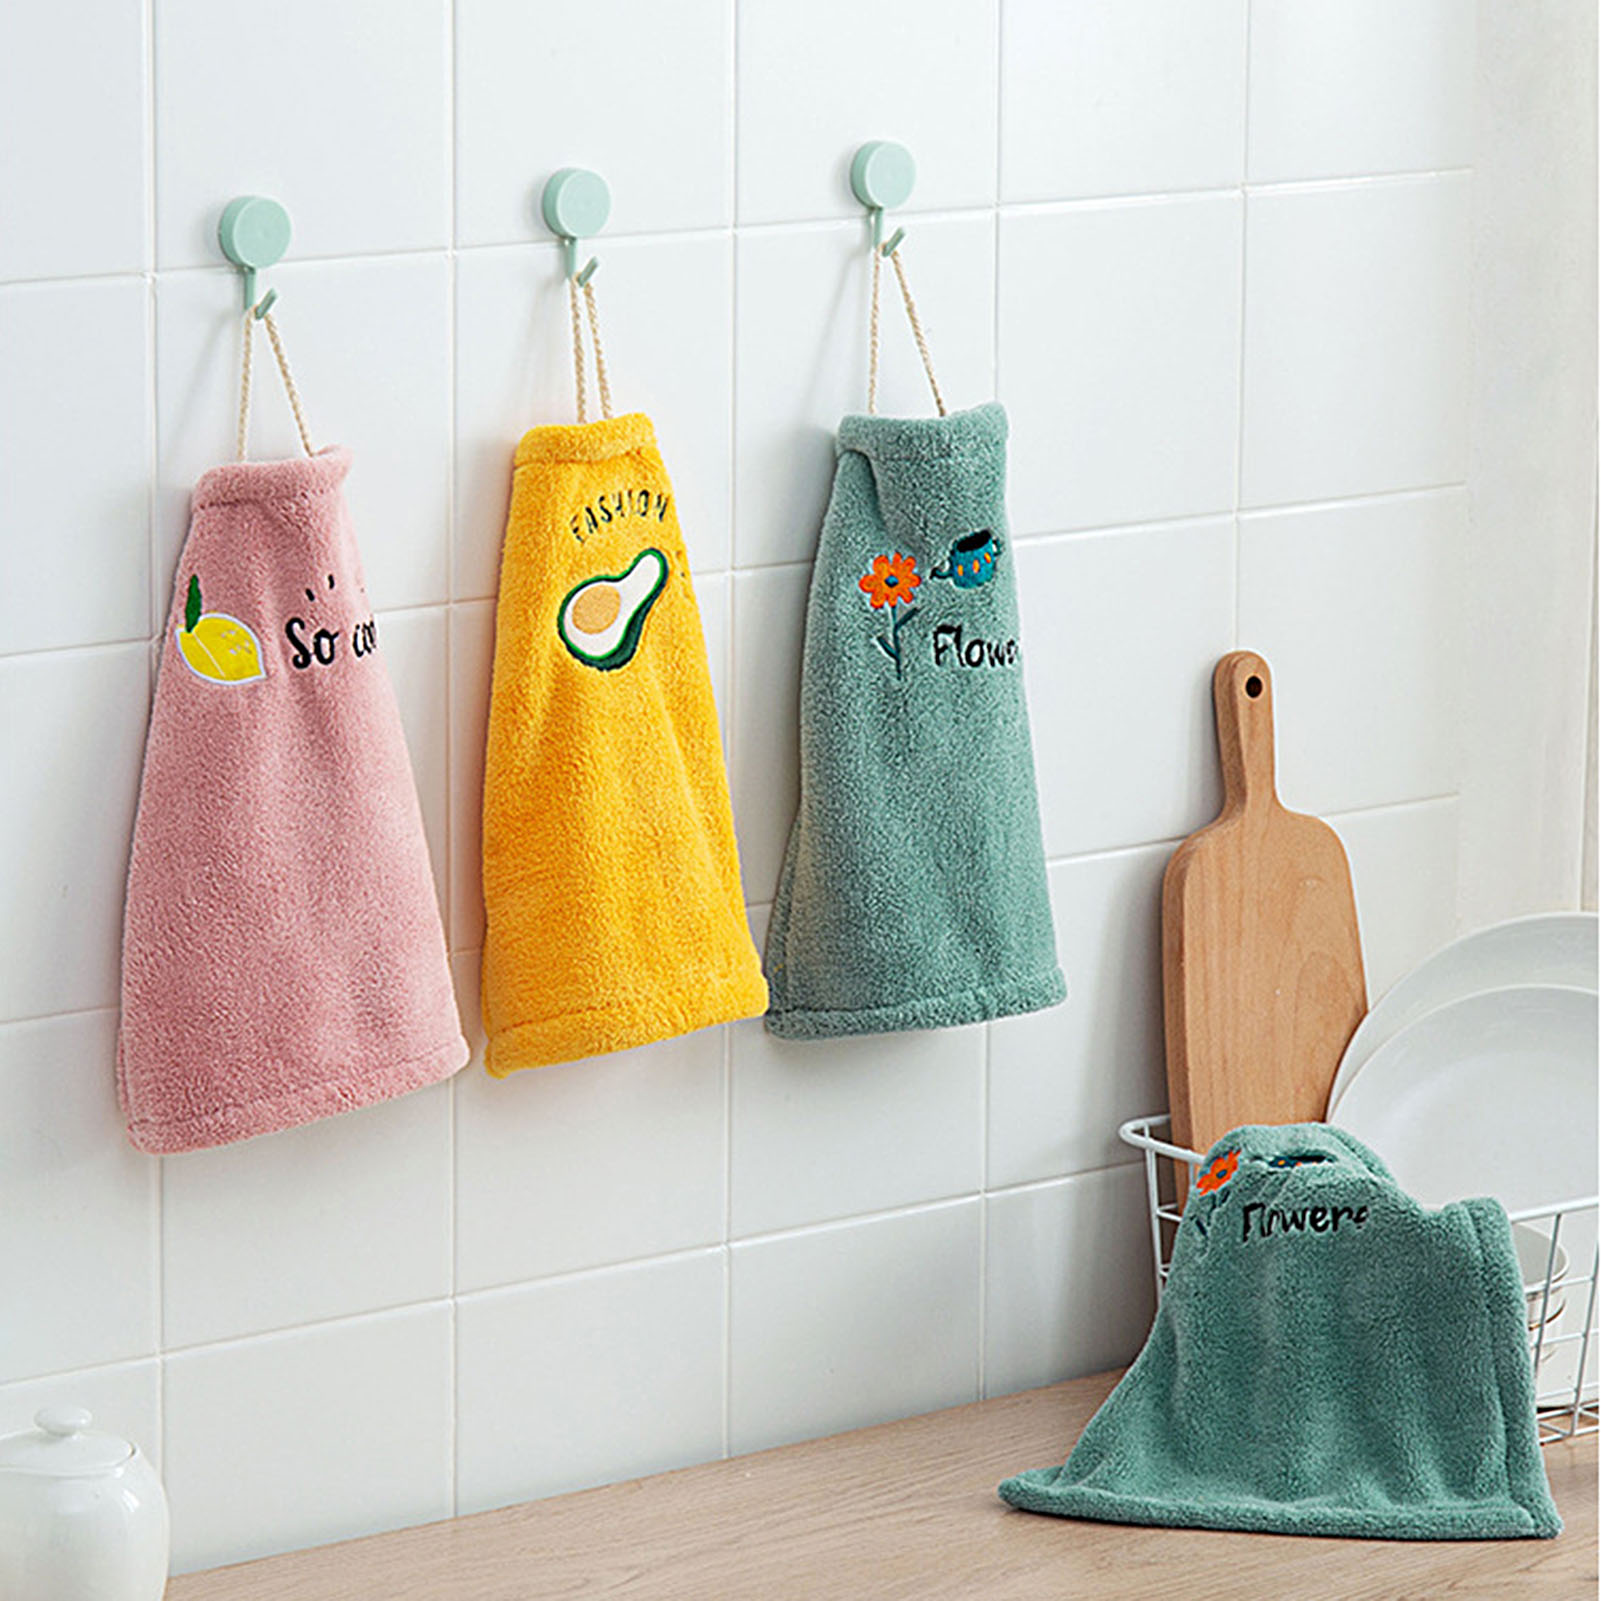 SPRING PARK Bathroom Hand Towels , Cotton Face Towels , Soft Absorbent Hand Towel for Home - image 1 of 7